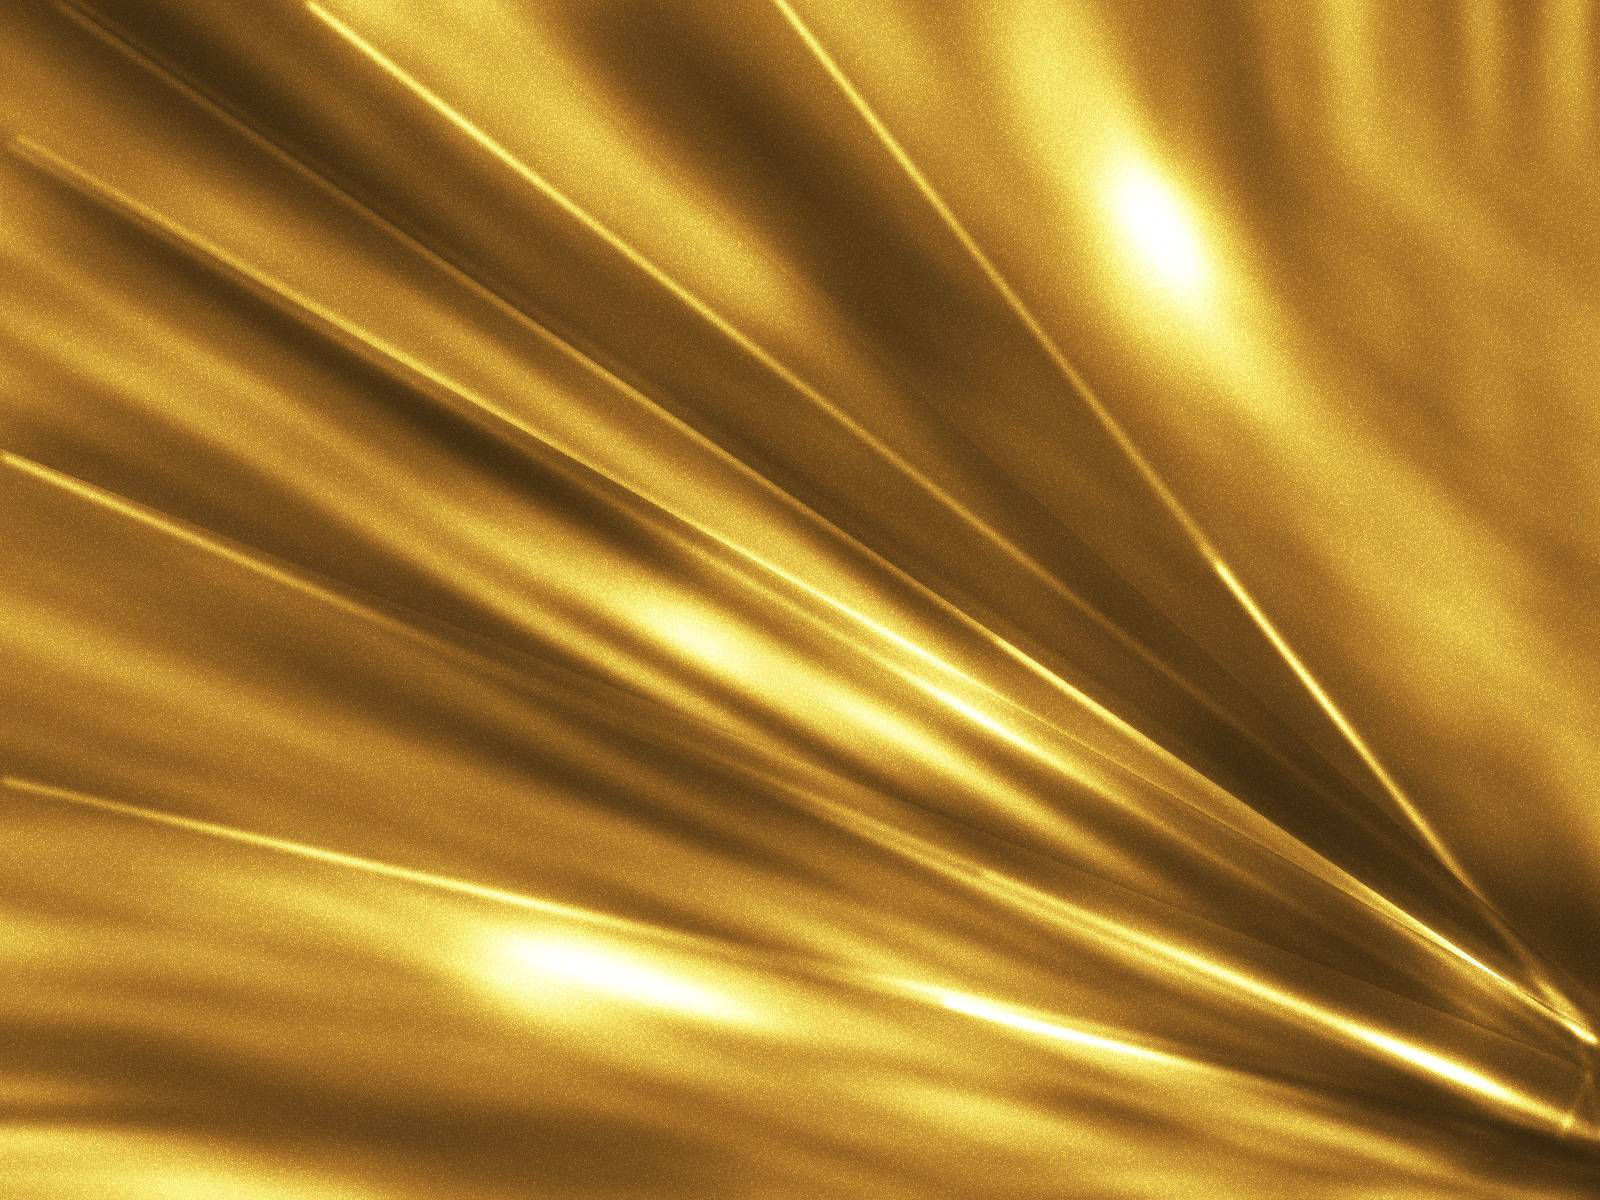 Details more than 170 goud wallpapers